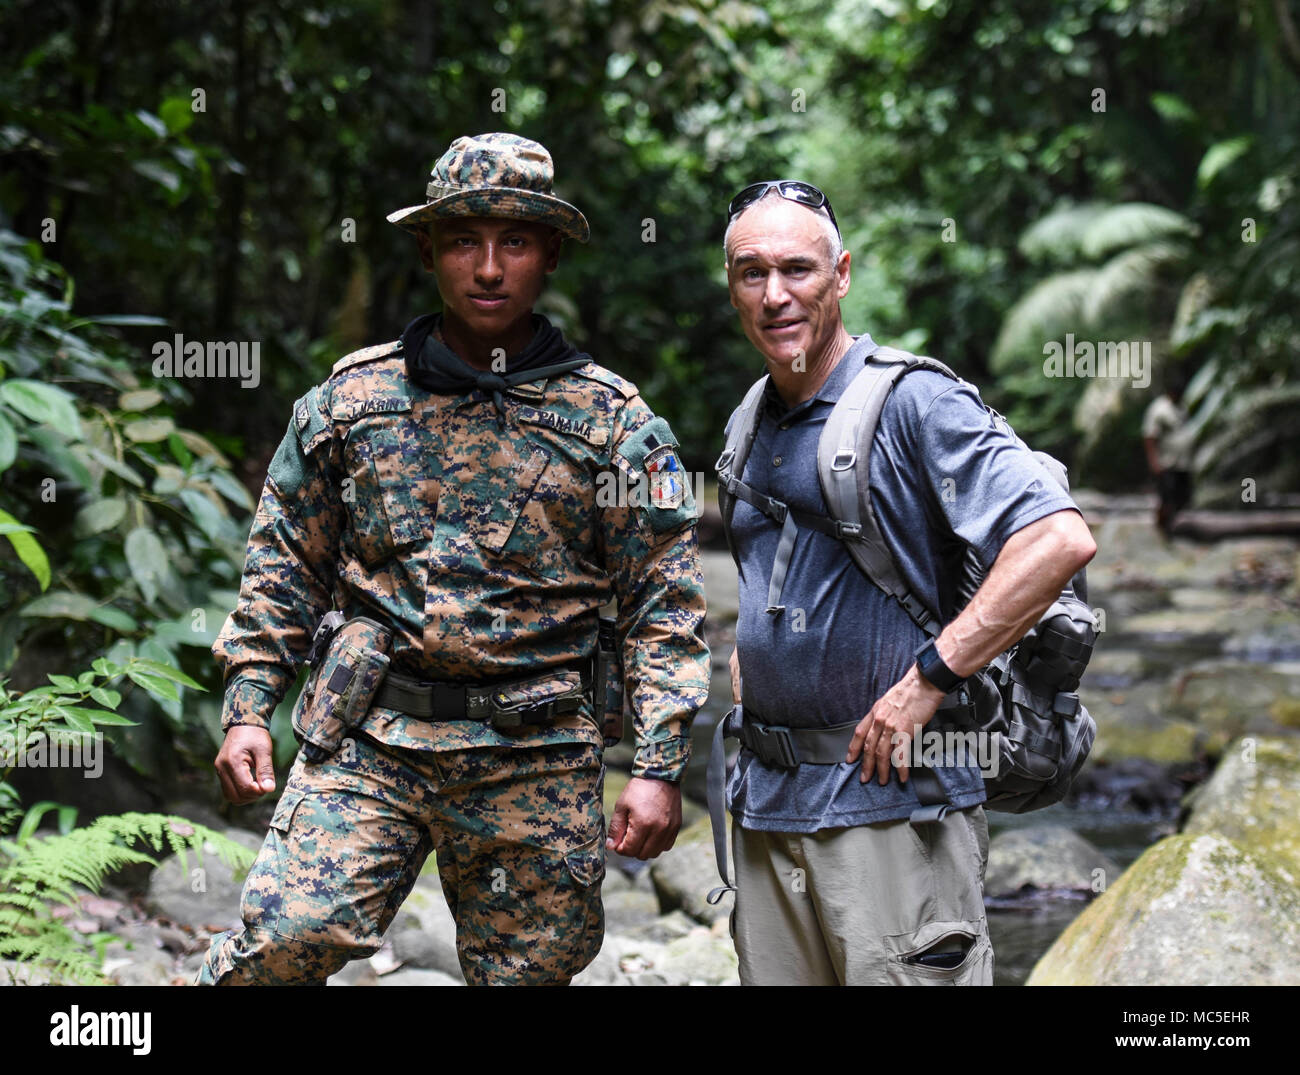 U.S. Air Force Chief Master Sgt. Scott Robbins, 346th Air Expeditionary Group superintendent, stands for a photo with a member of the Panamanian military and police force known as SENAFRONT, while hiking in the Darien National Park, Panama, April 2, 2018, during exercise New Horizons 2018. Exercise New Horizons is a joint training exercise where all branches of the U.S. military conduct training in civil engineer, medical and support services while benefiting the local community. (U.S. Air Force photo by Senior Airman Dustin Mullen/Released) Stock Photo